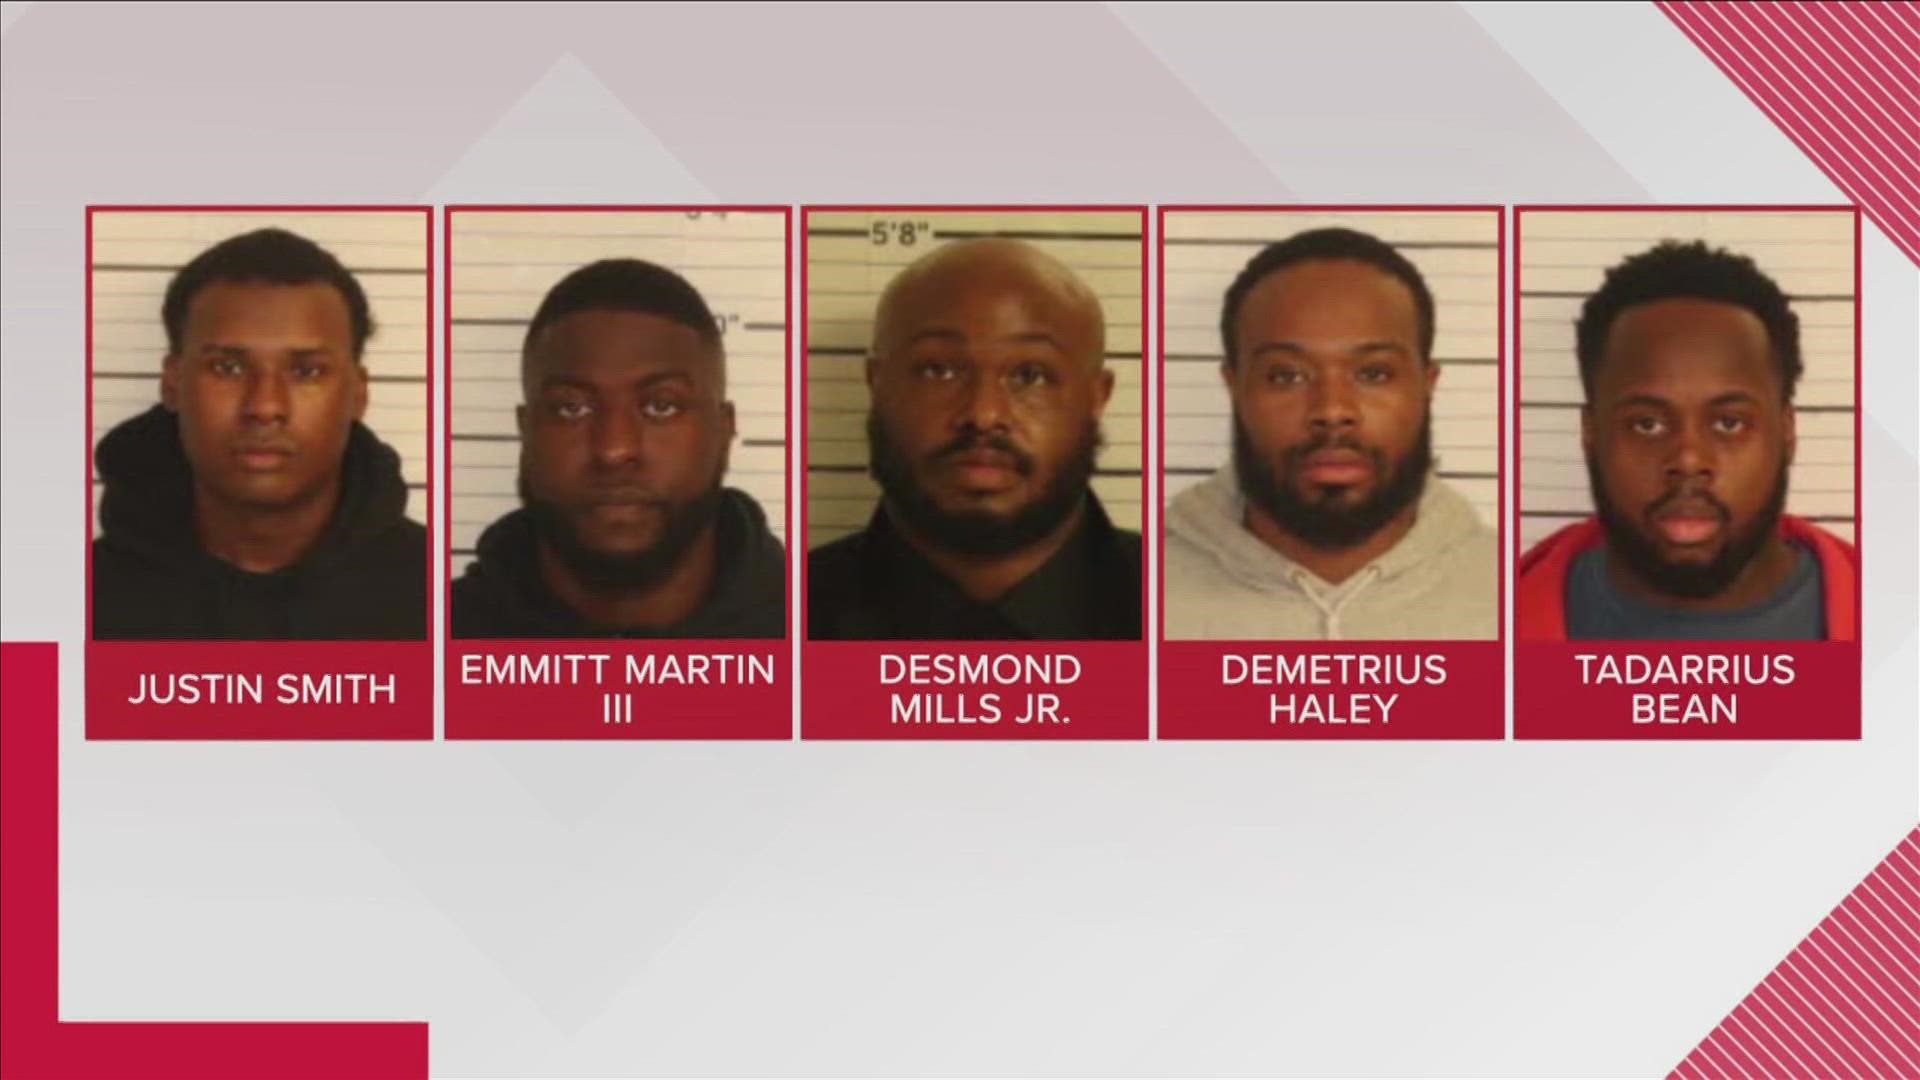 The five officers face charges of second degree murder, aggravated kidnapping and official misconduct, among others.